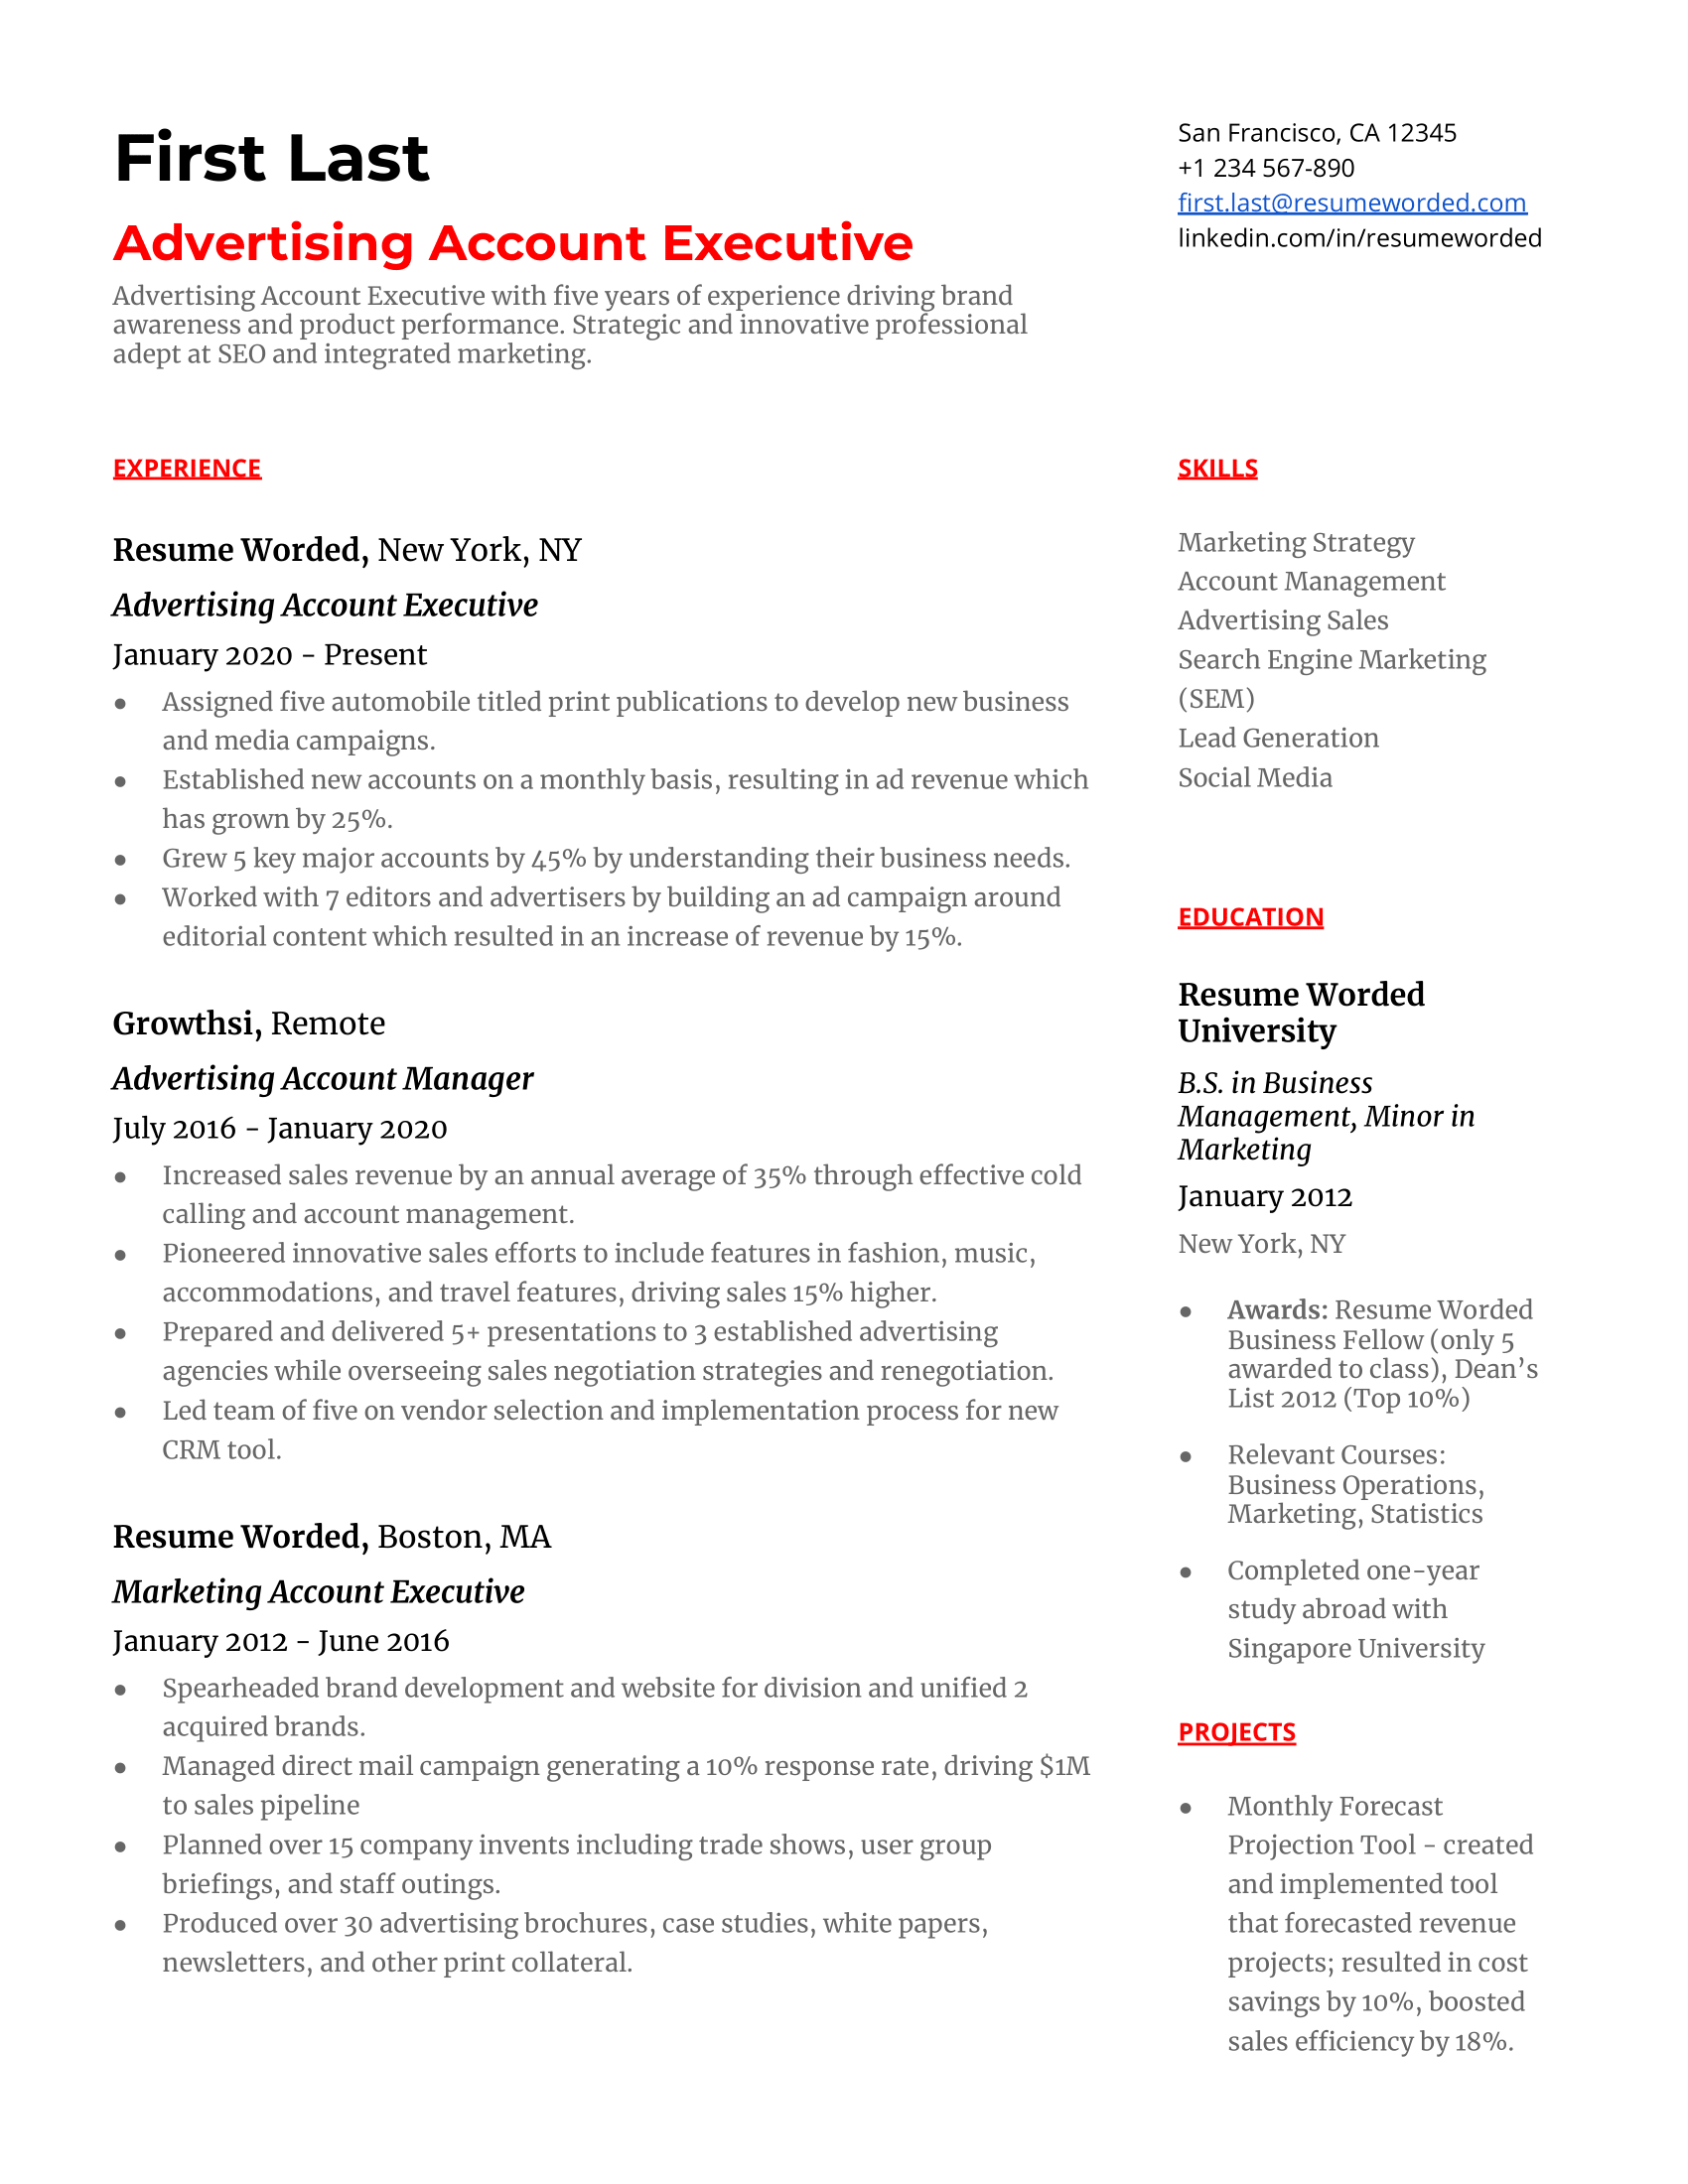 An engaging CV for Advertising Account Executive featuring digital marketing skills and analytical abilities.